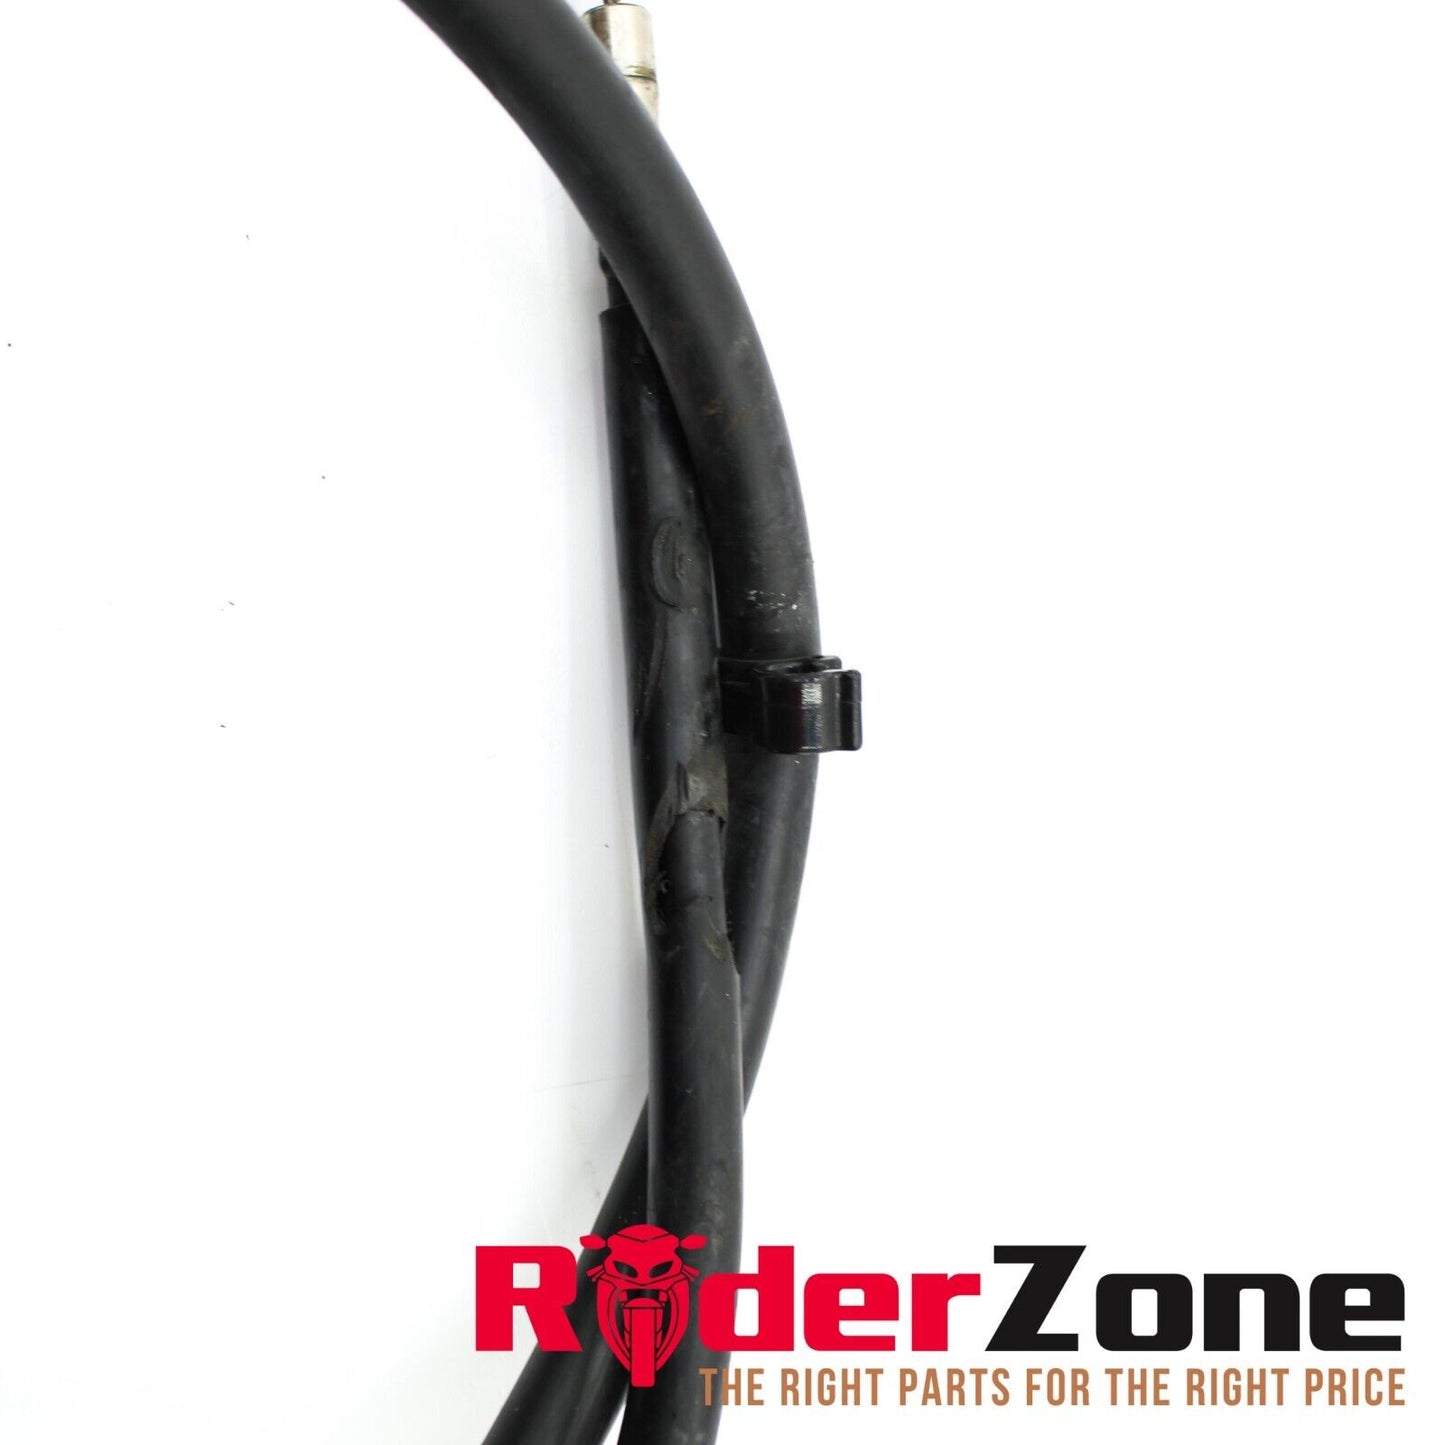 2015 - 2019 YAMAHA YZF R1 M S CLUTCH CABLE LINE NO TEARS READY FOR INSTALL